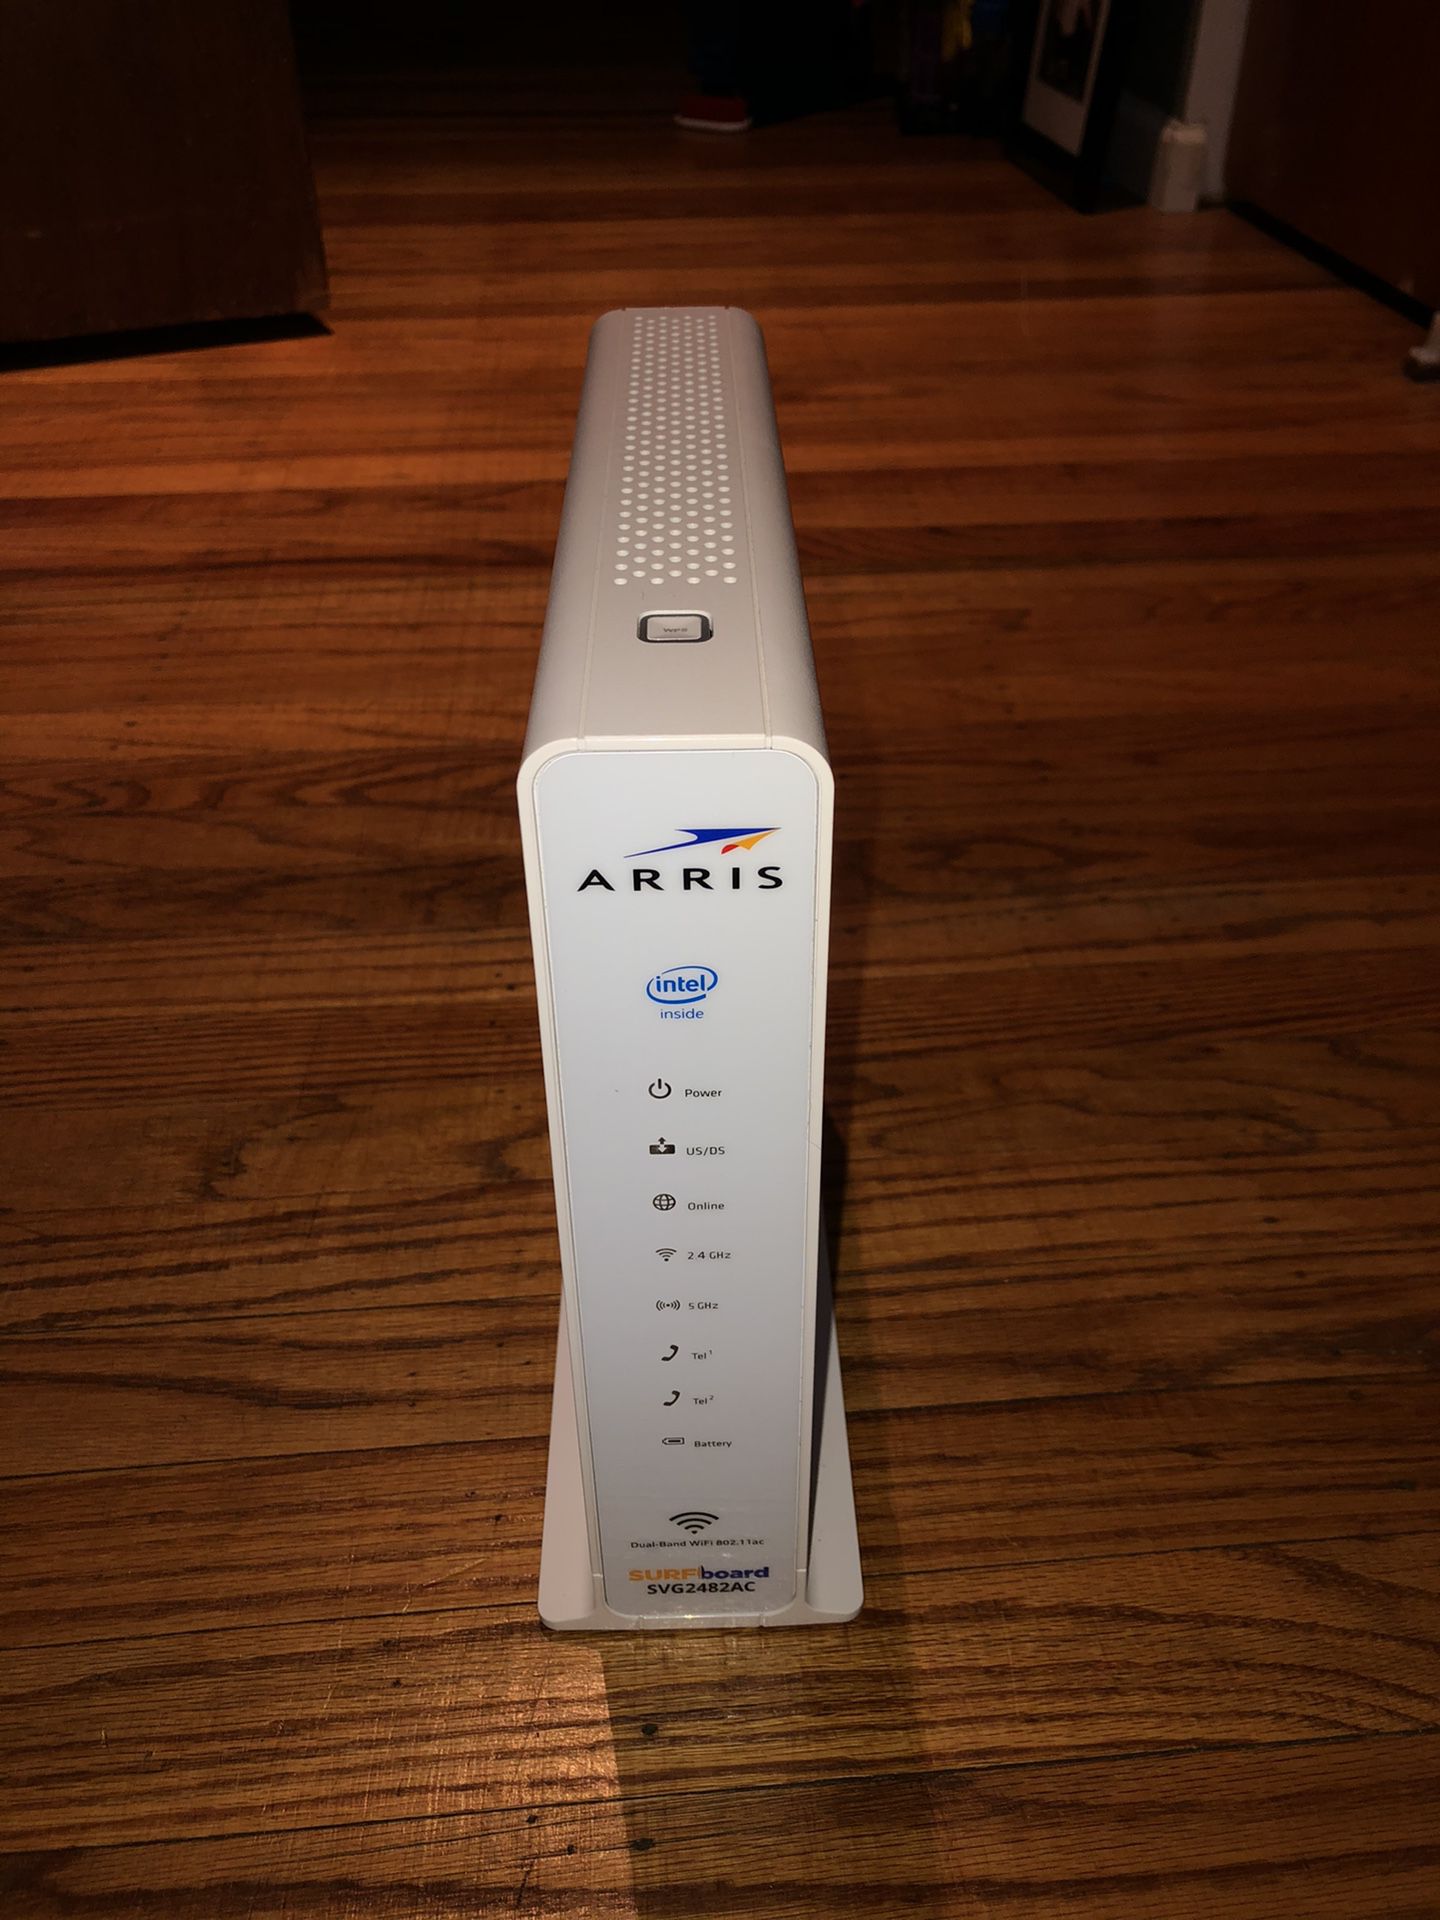 ARRIS - SURFboard AC-1750 Dual-Band Wi-Fi Router with 24 x 8 DOCSIS 3.0 Cable Modem - White